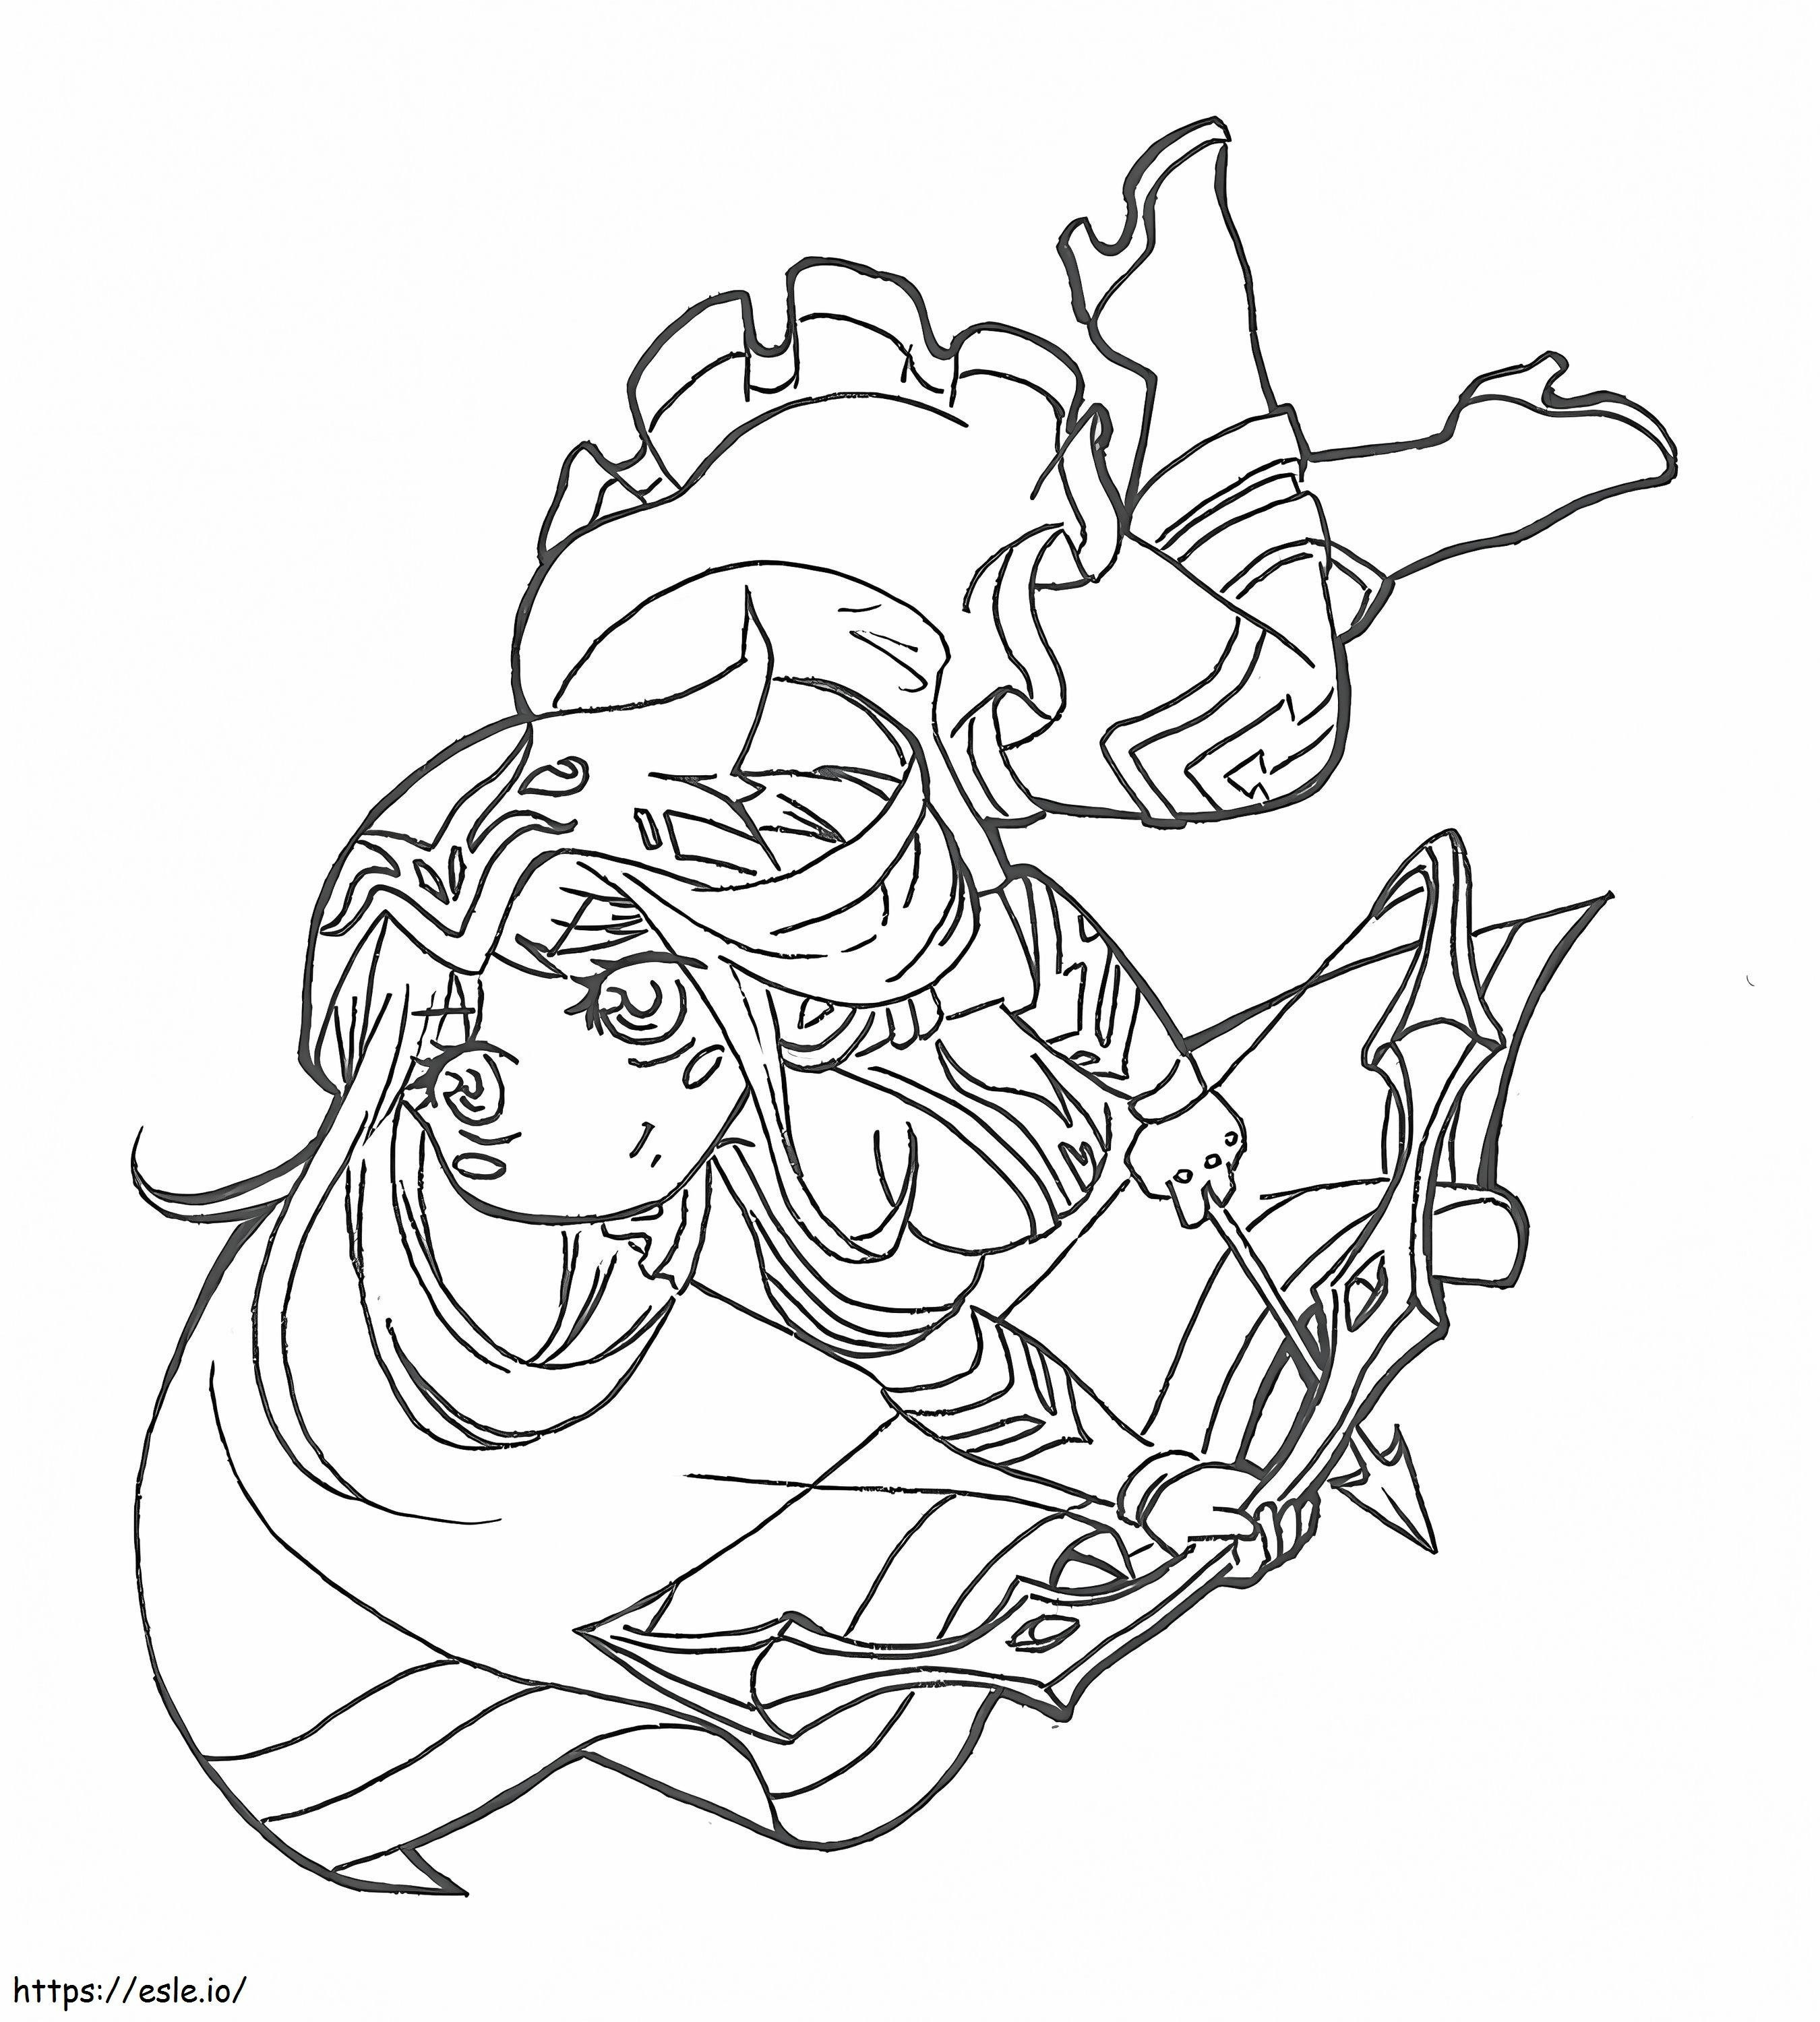 Chibi Ashe A4 coloring page